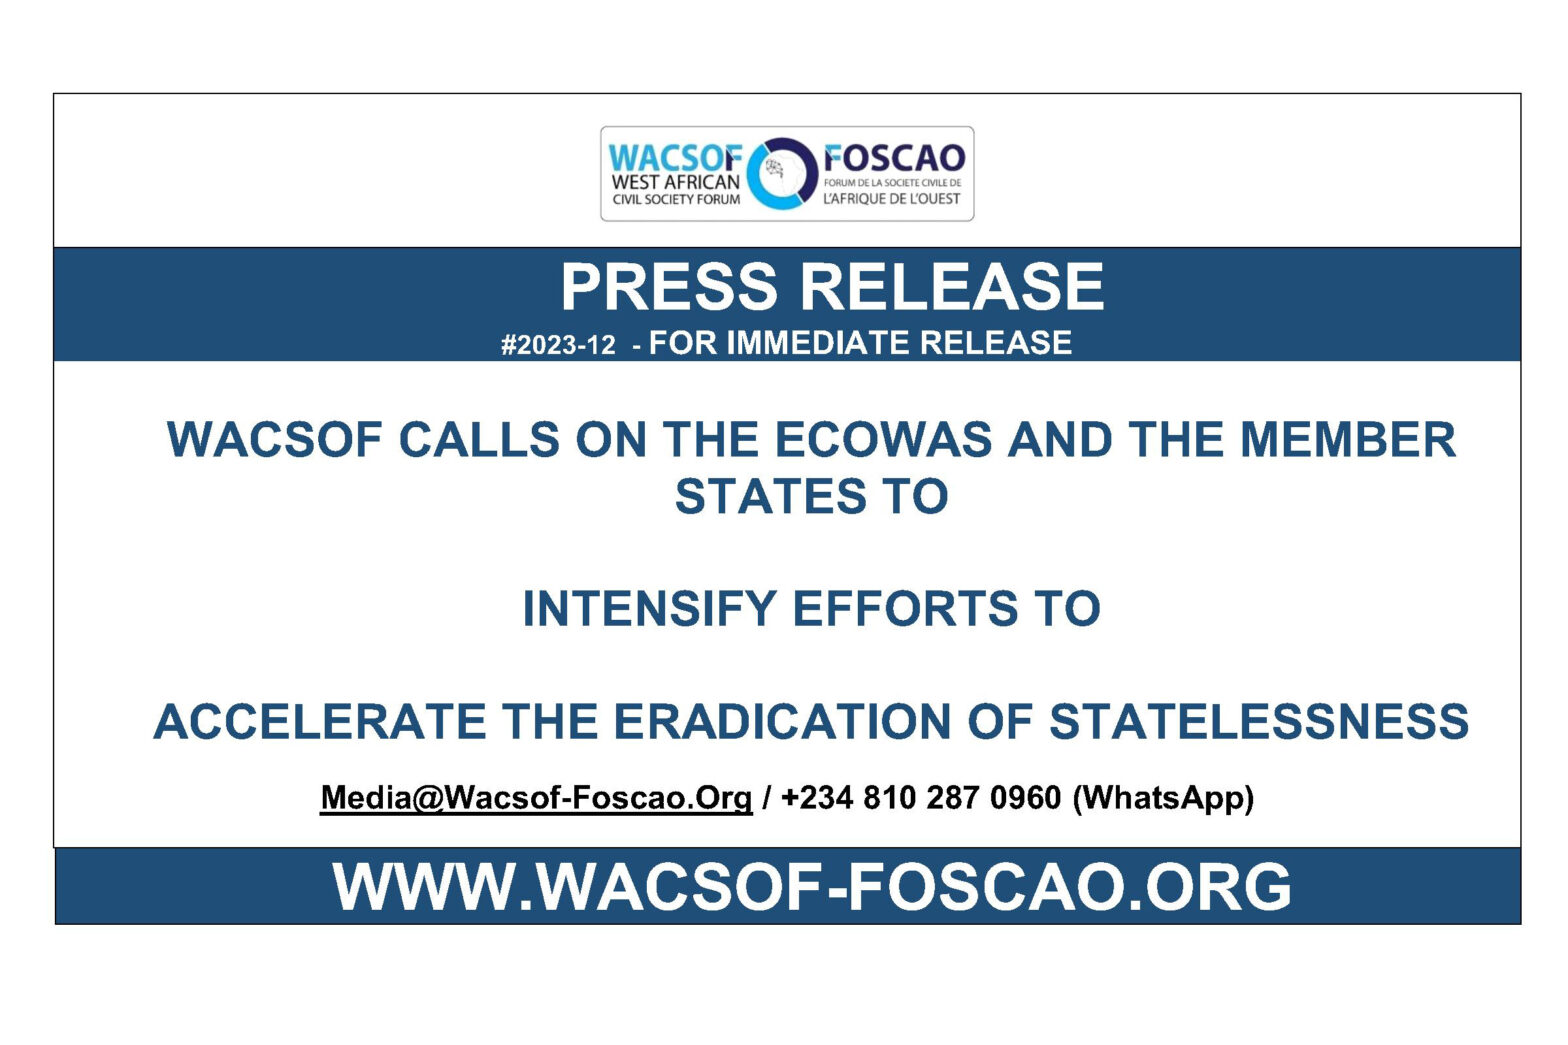 WACSOF CALLS ON THE ECOWAS AND THE MEMBER STATES TO INTENSIFY EFFORTS TO ACCELERATE THE ERADICATION OF STATELESSNESS